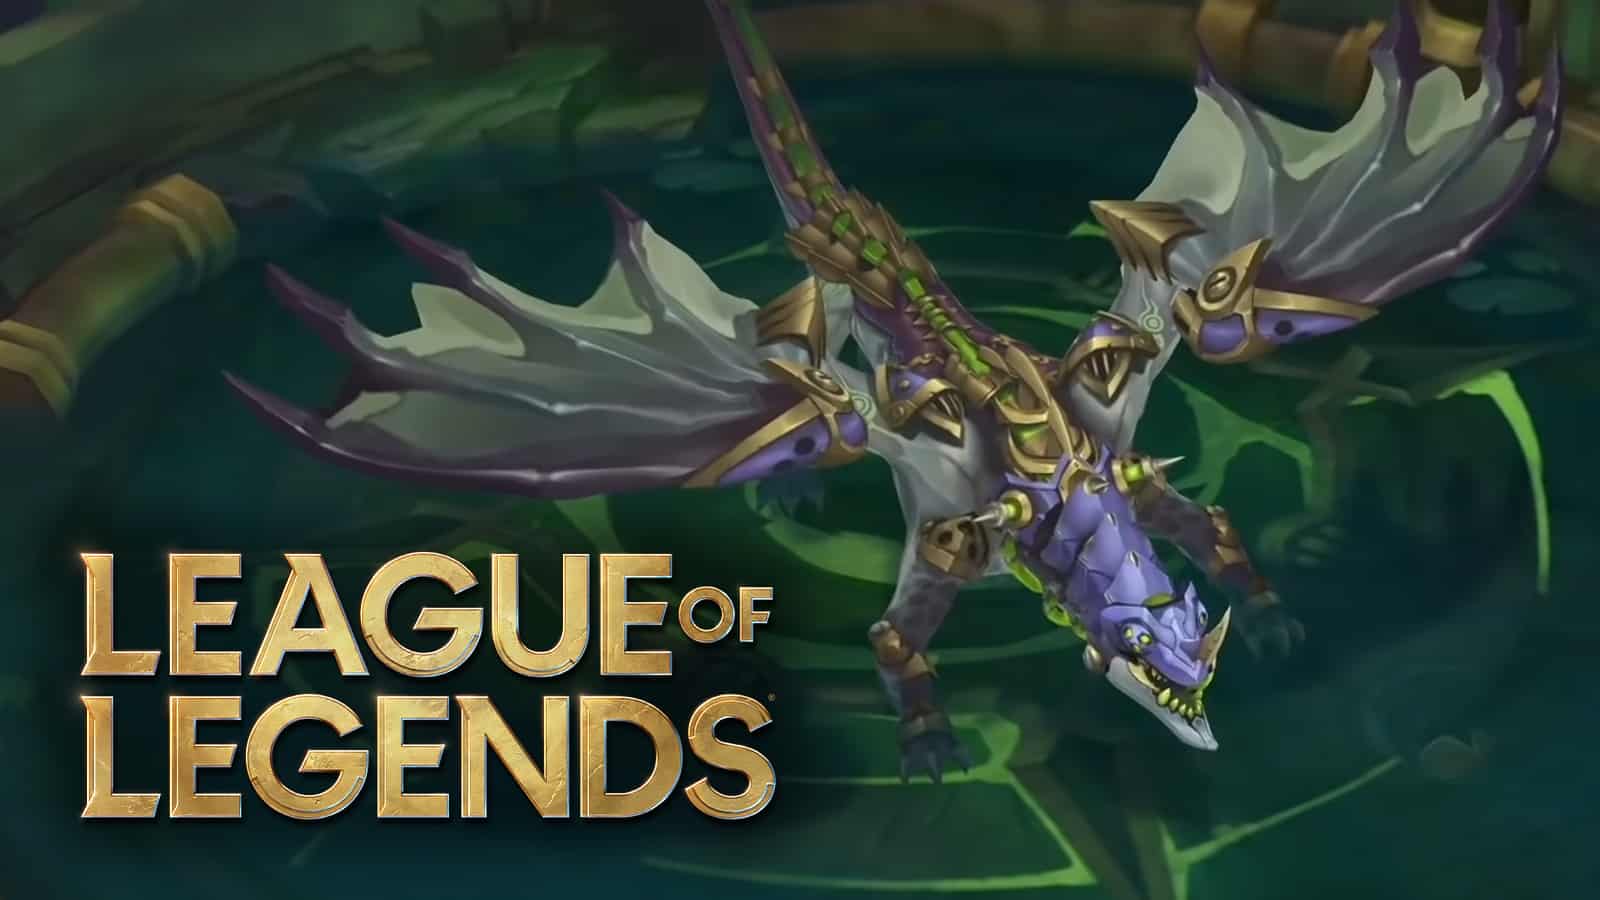 Chemtech Dragon in League of Legends